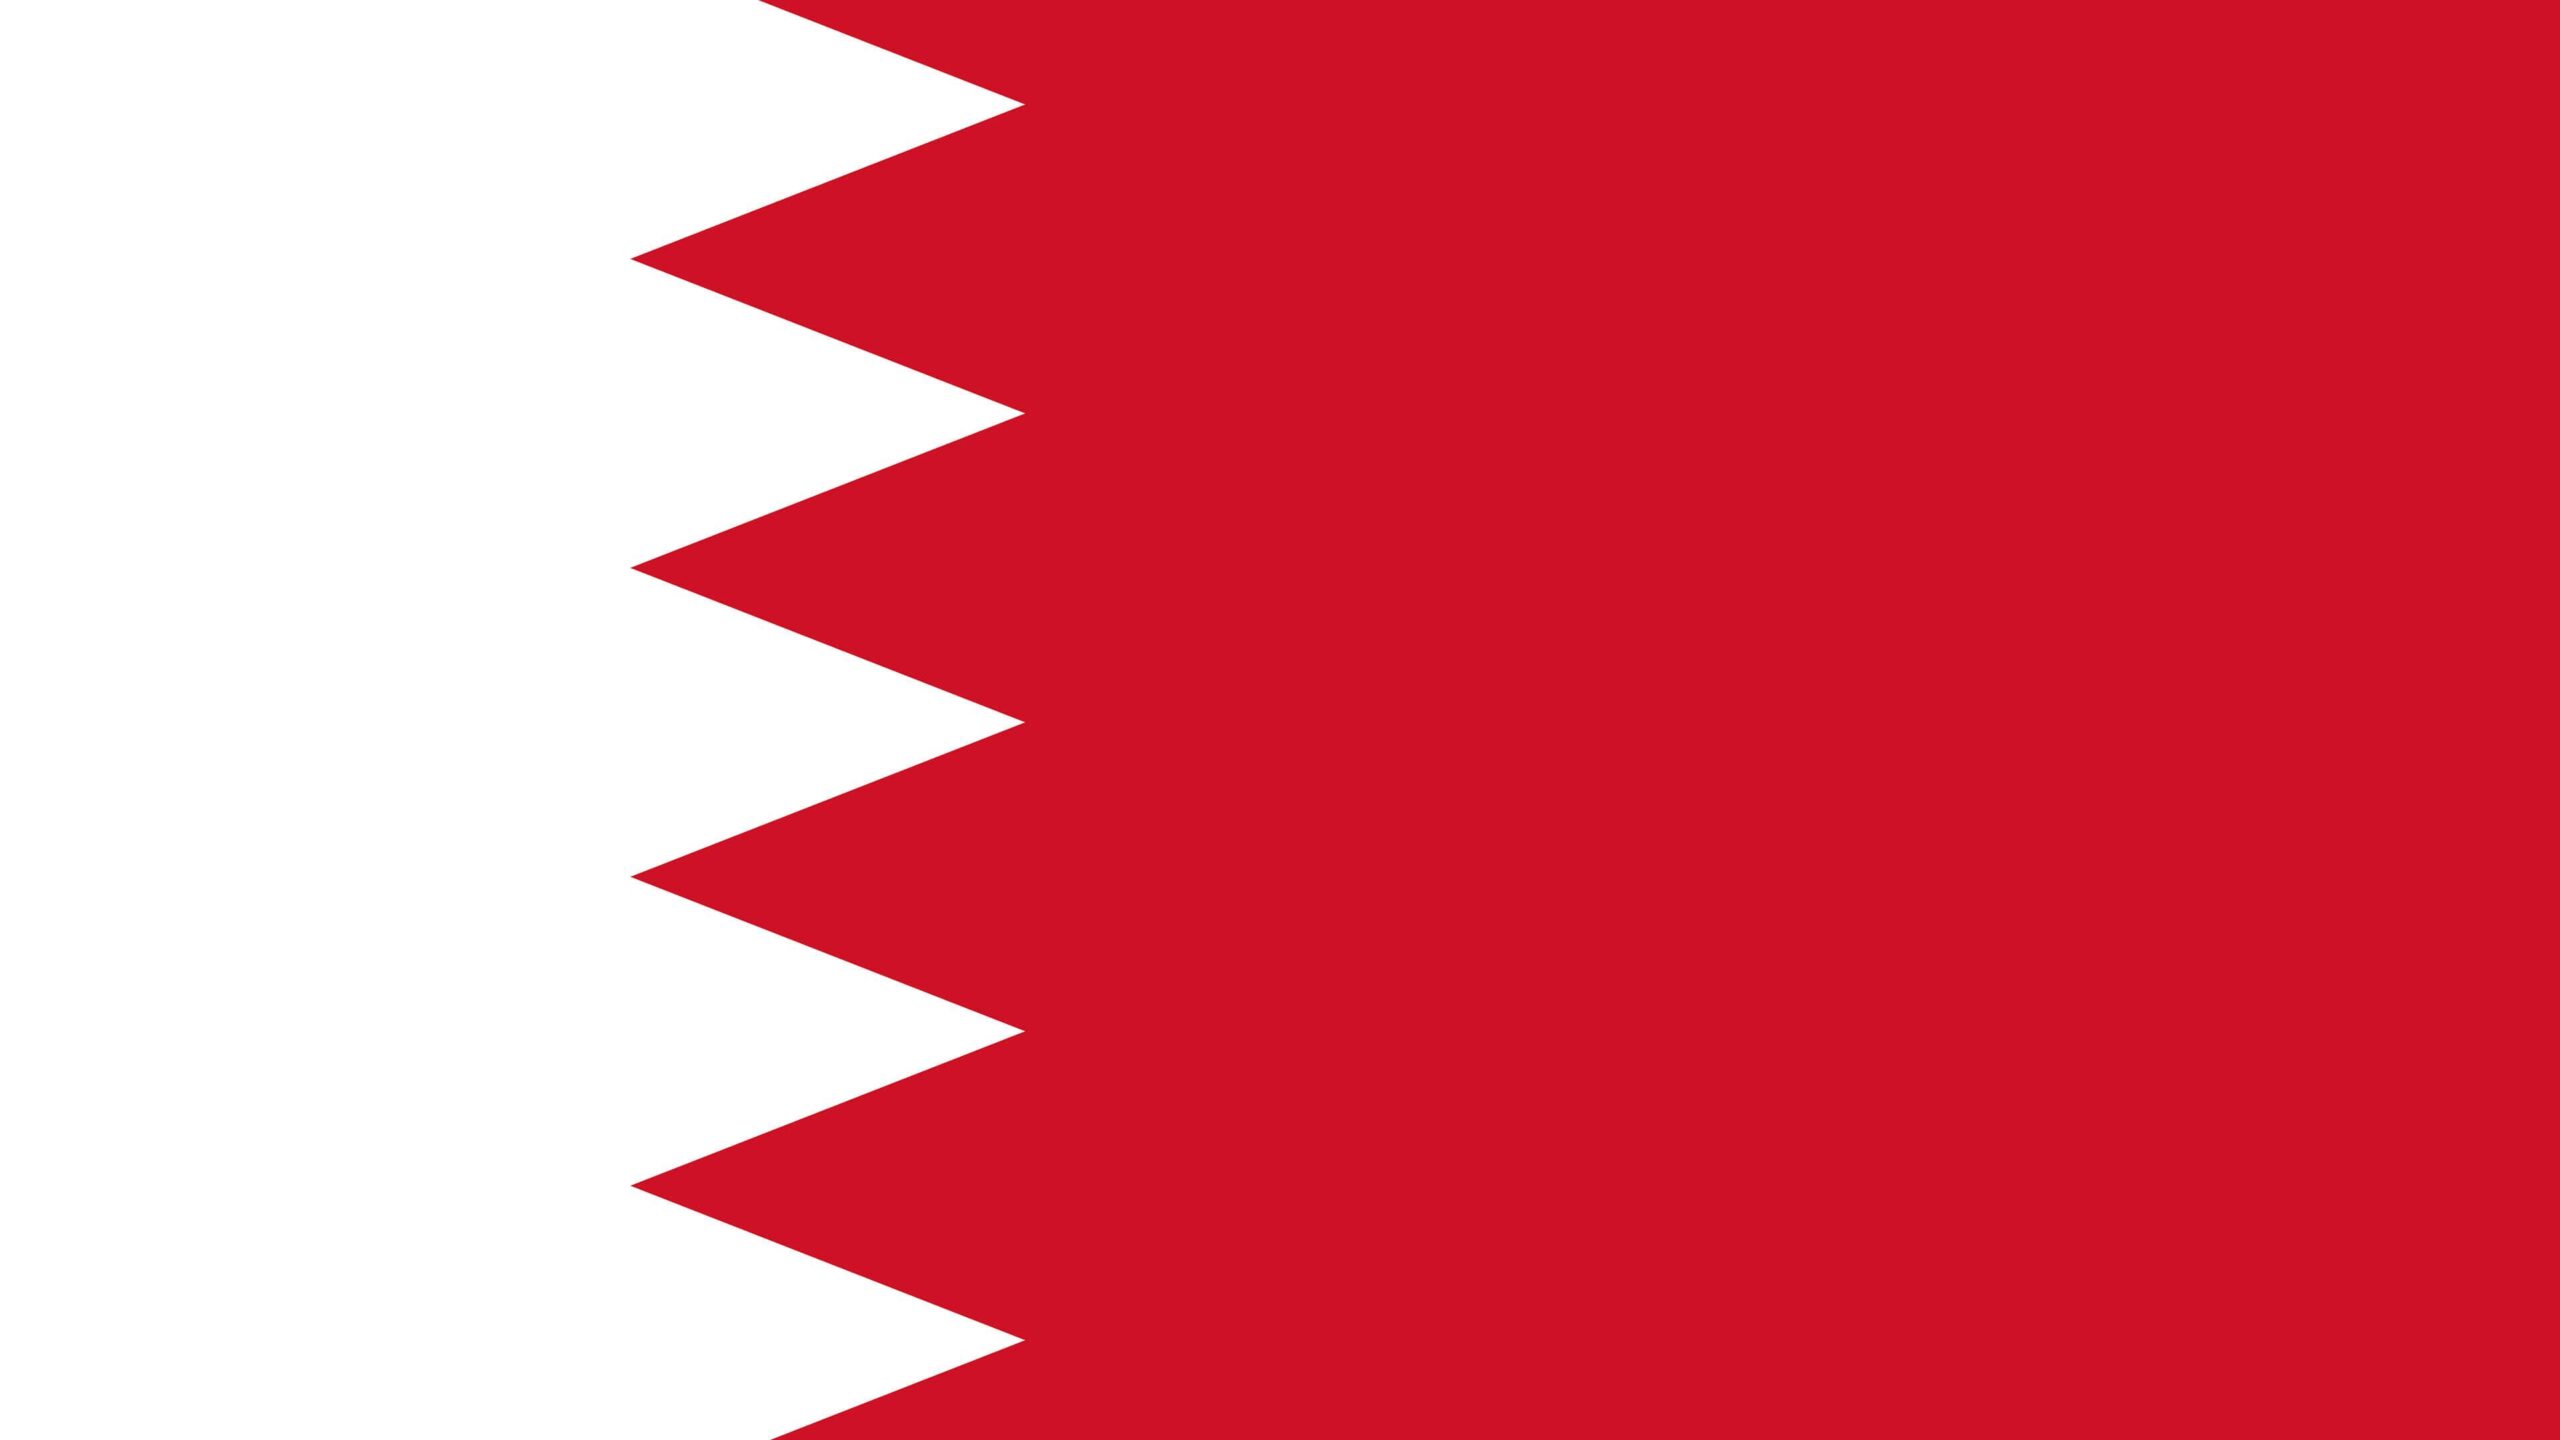 Bahrain Flag Uhd 4k Wallpapers In High Quality